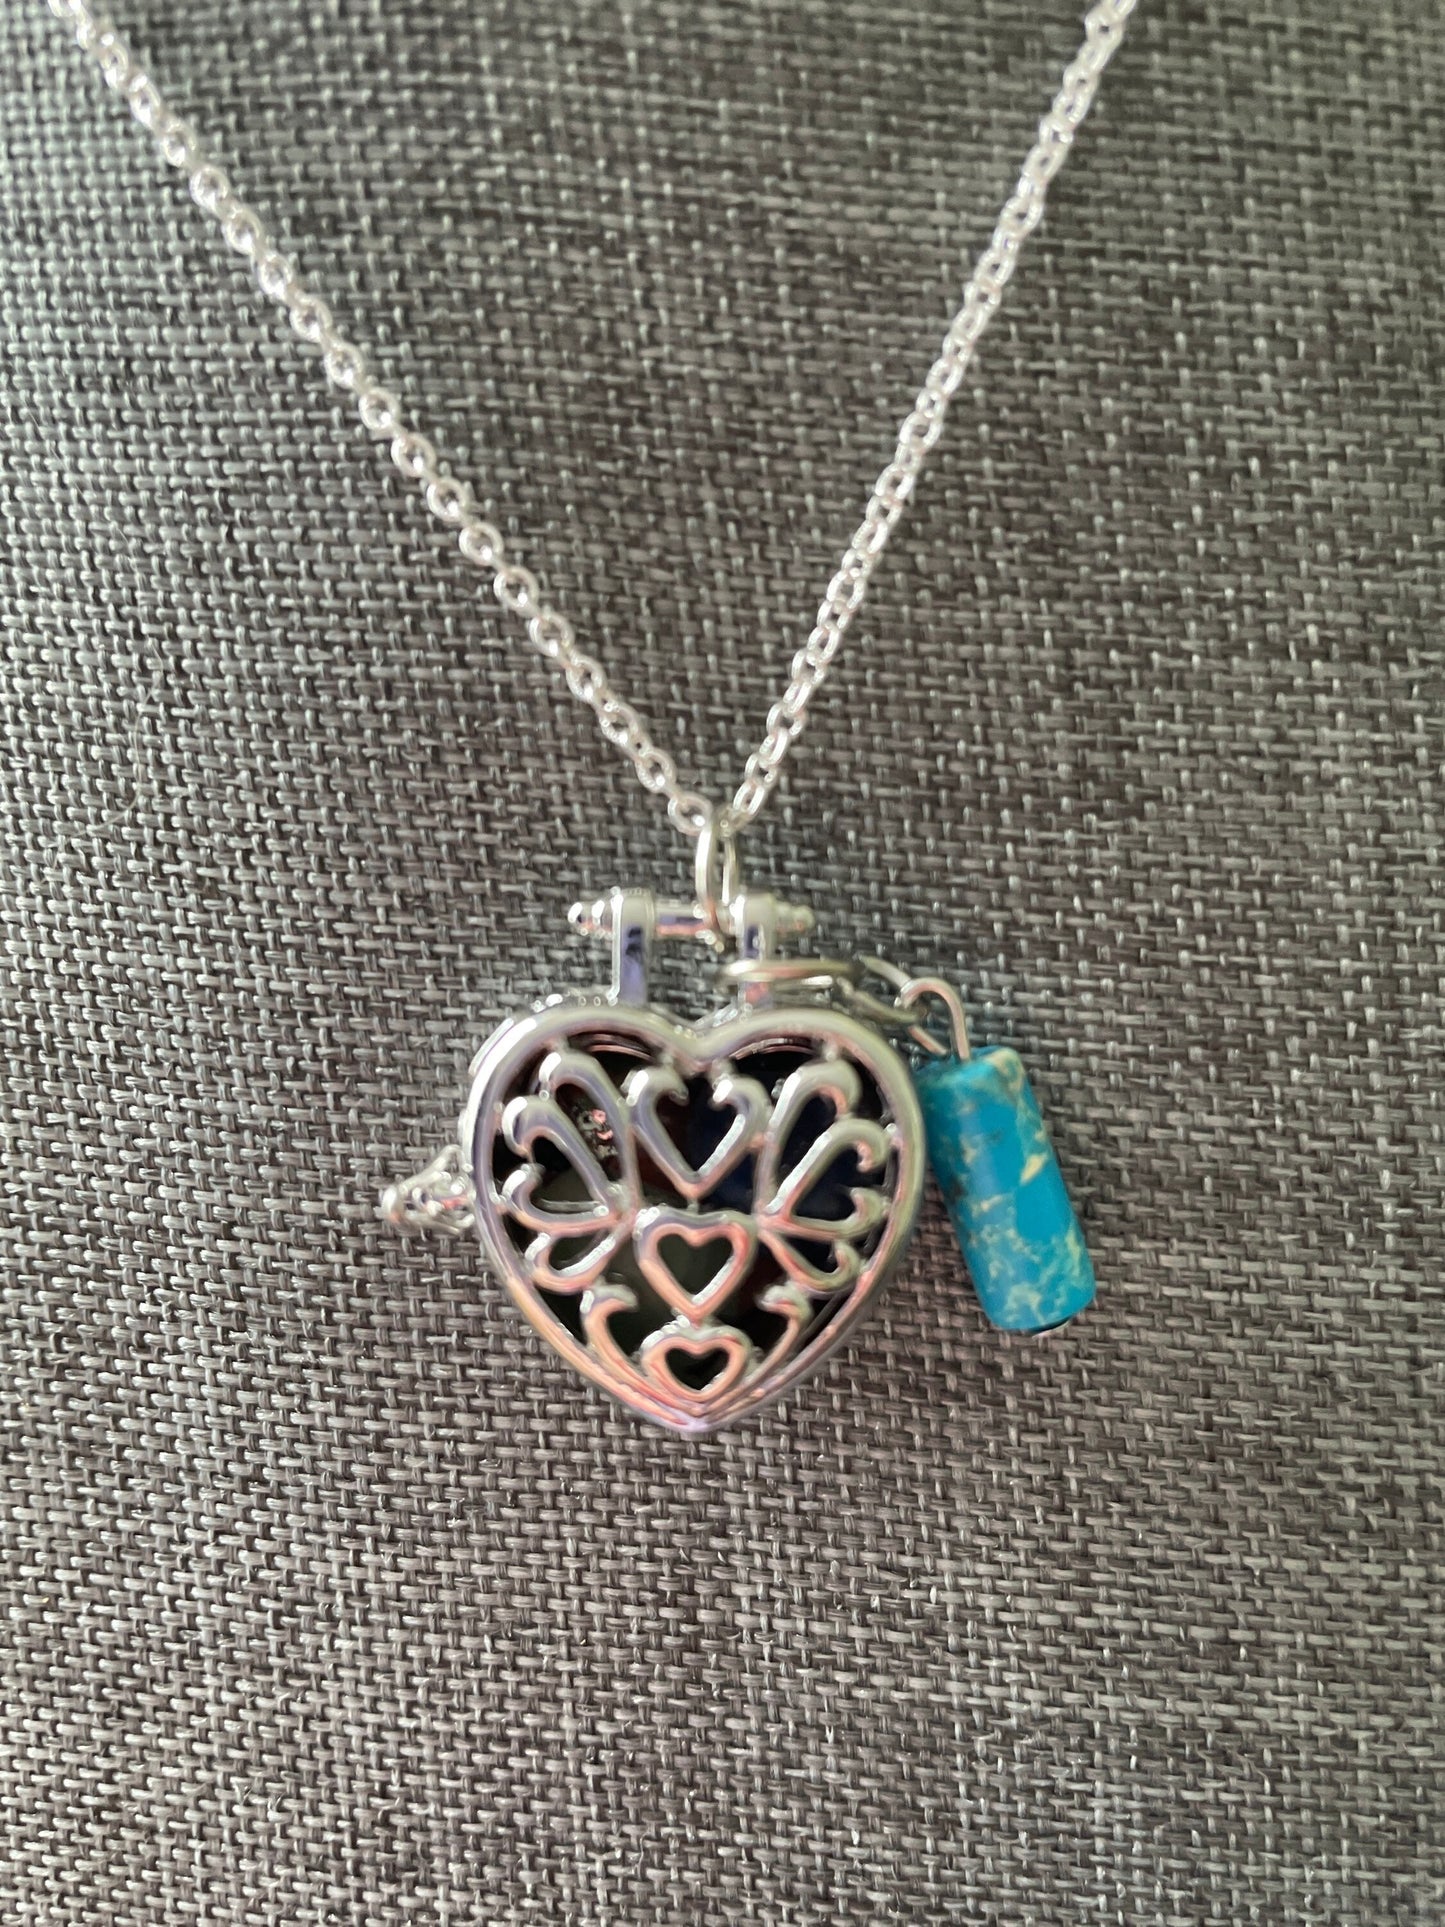 Beautiful Stainless steel silver chain locket filled with crystals With turquoise accent 16+”